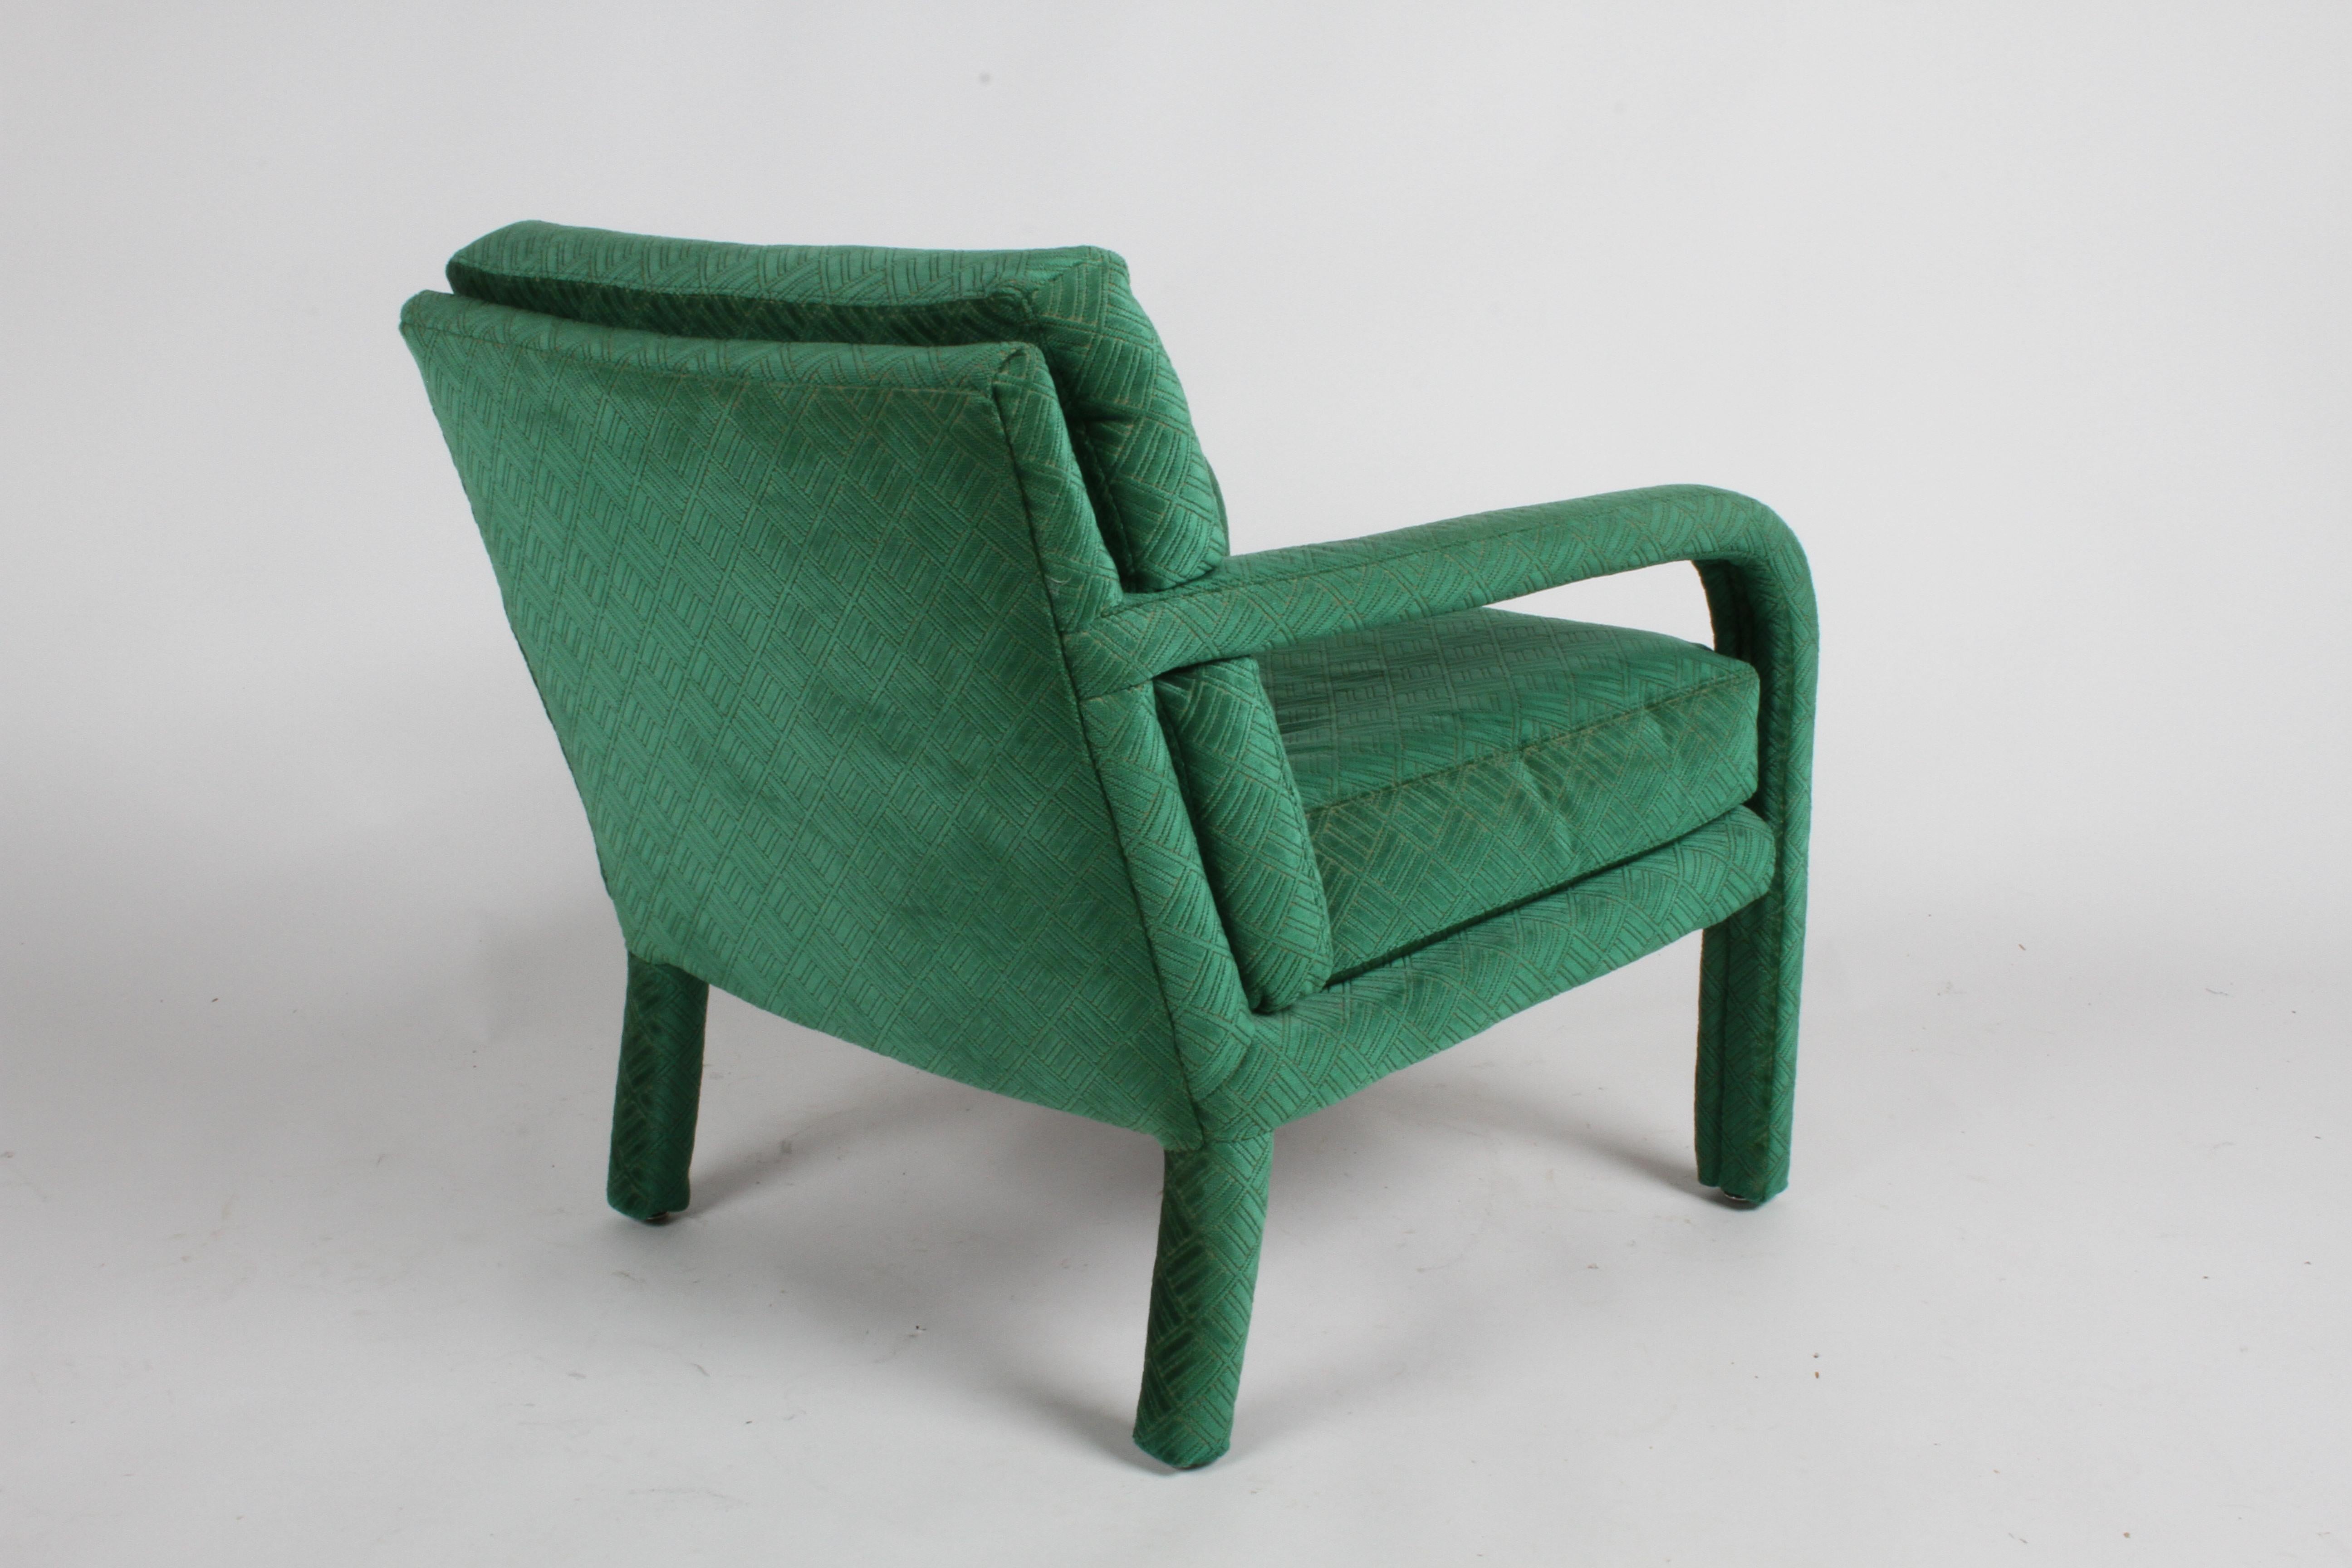 Pair of 1970s Directional Lounge Chairs in a Textured Emerald Green Upholstery 4